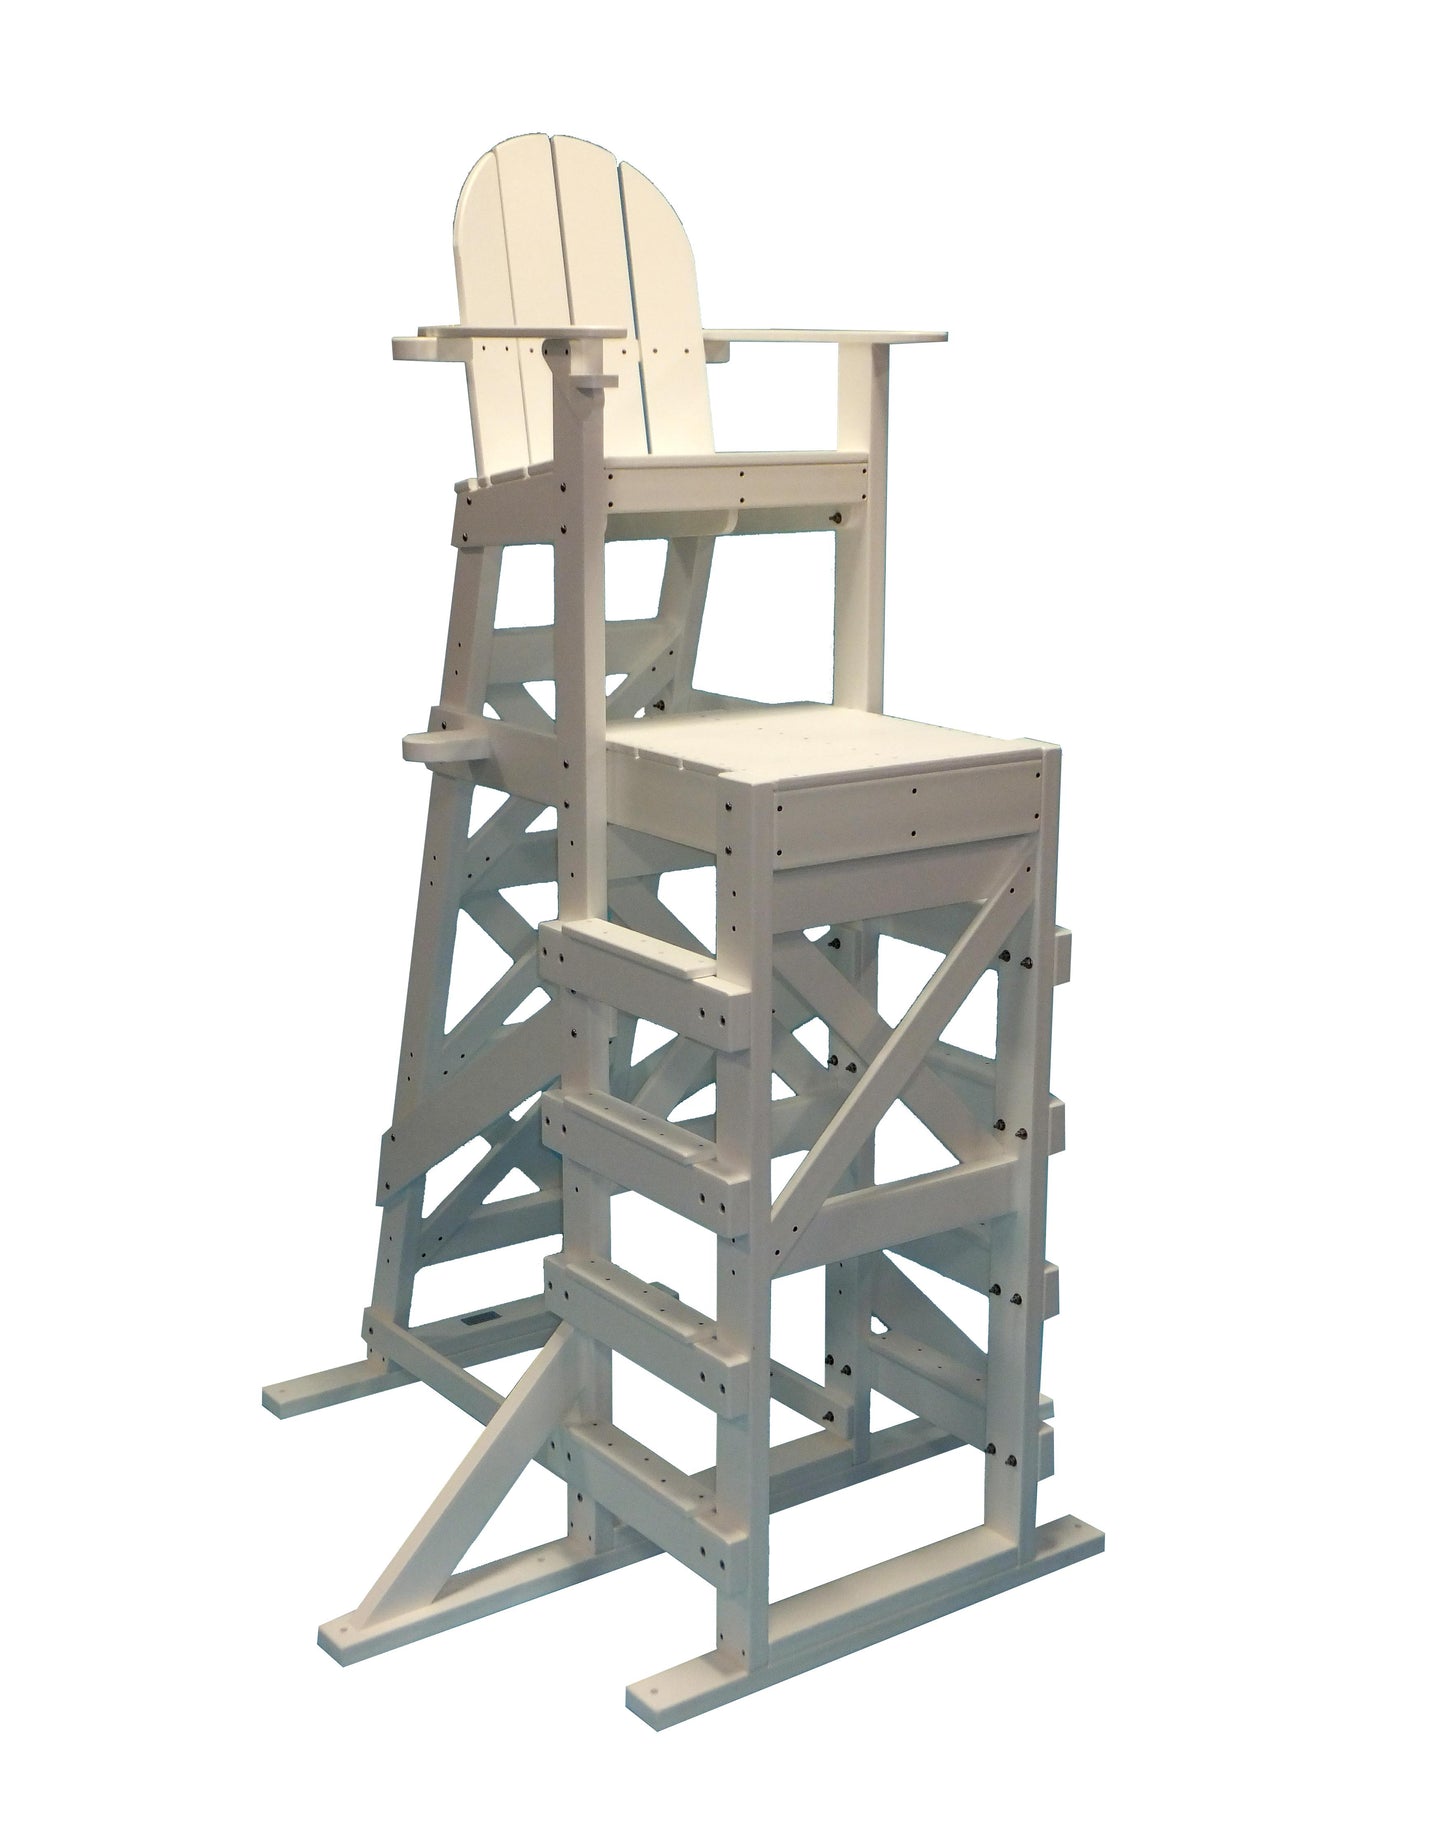 Tailwind Furniture Recycled Plastic XTLG-540 X-Tall, Side Step Lifeguard Chair - Seat Height: 72” - LEAD TIME TO SHIP 10 TO 12 BUSINESS DAYS